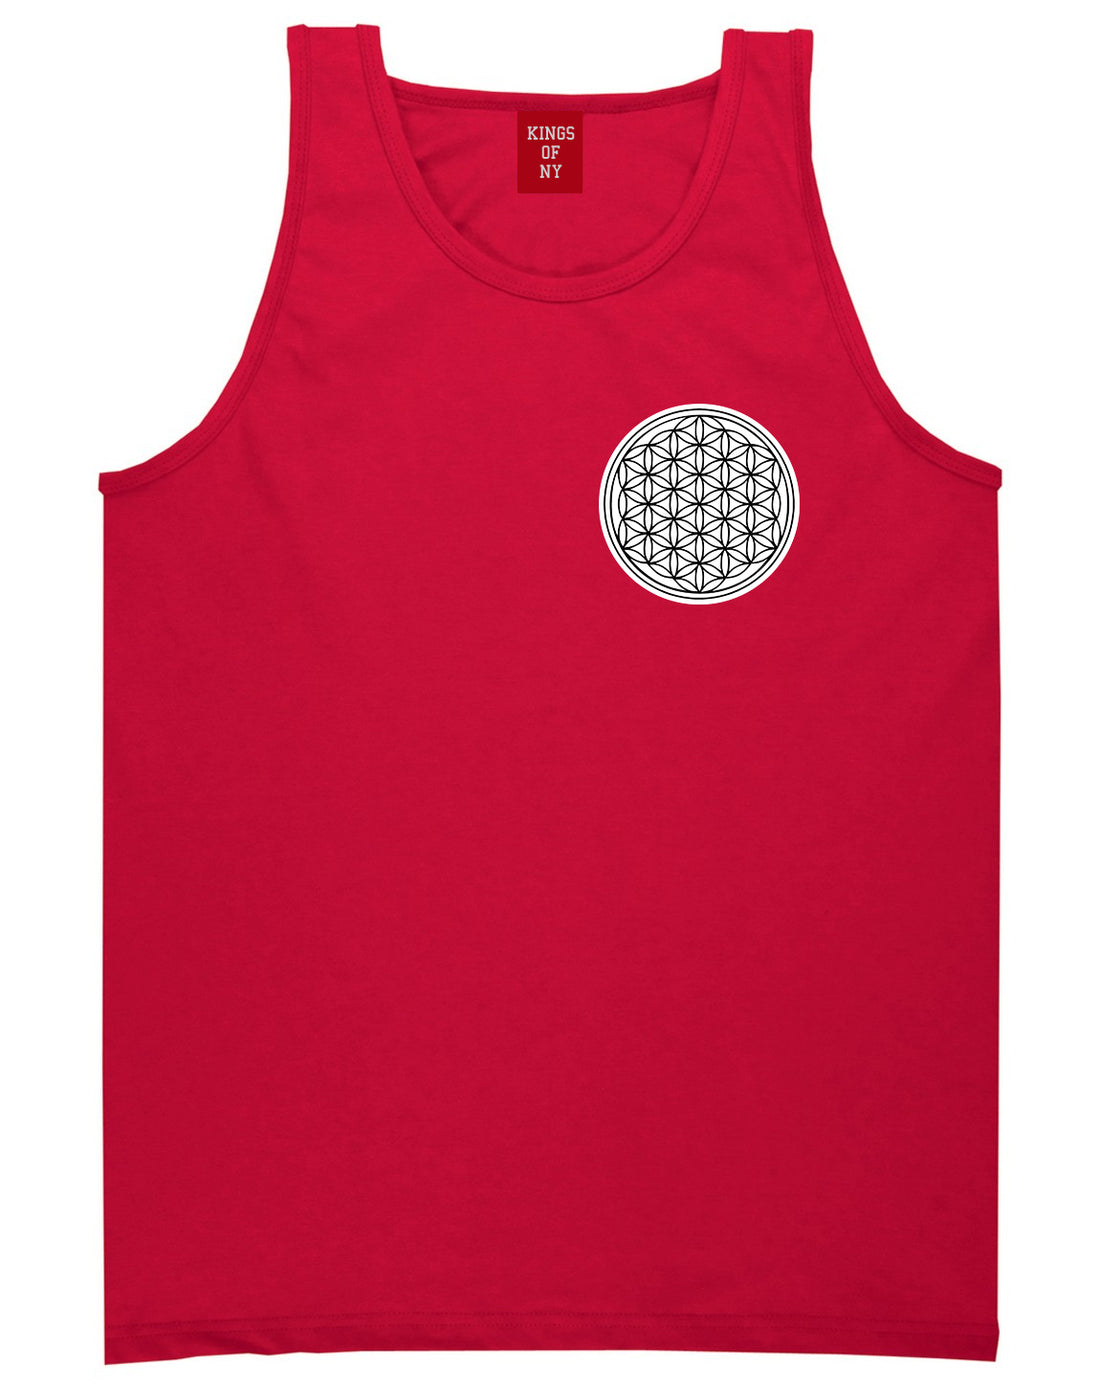 Flower Of Life Chest Mens Red Tank Top Shirt by KINGS OF NY